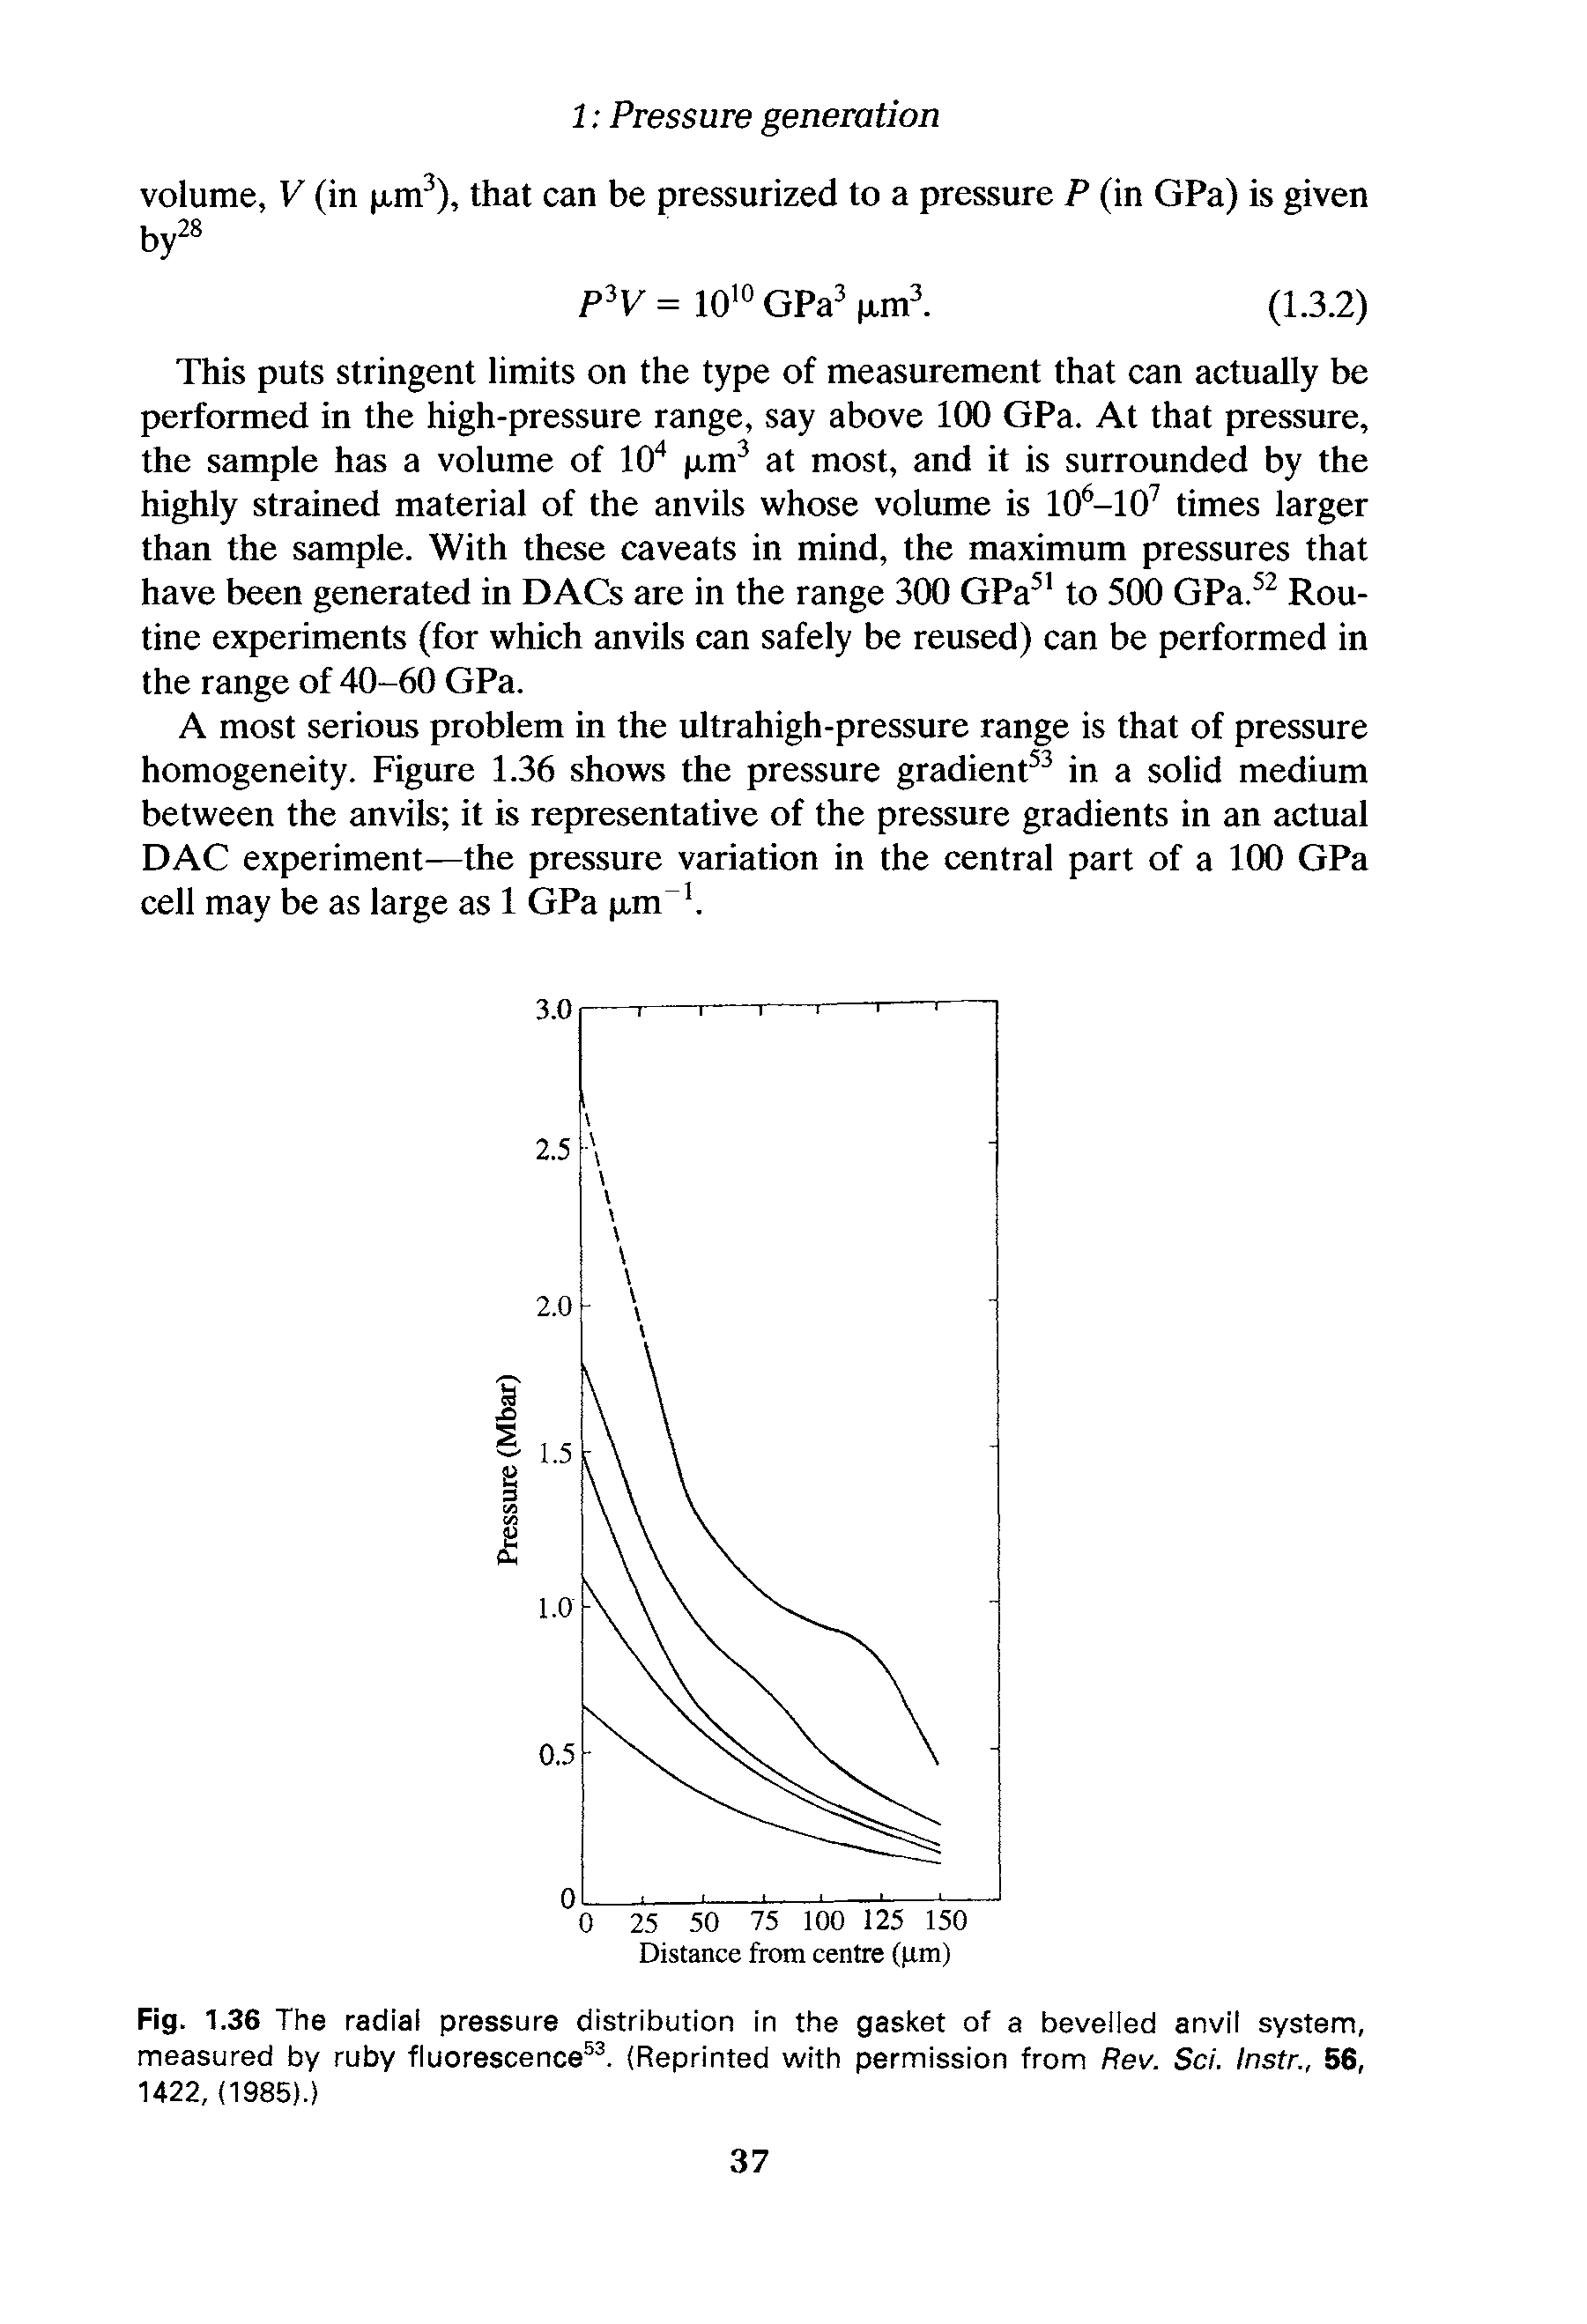 Fig. 1.36 The radial pressure distribution in the gasket of a bevelled anvil system, measured by ruby fluorescence . (Reprinted with permission from Rev. Sci. Instr., 56, 1422, (1985).)...